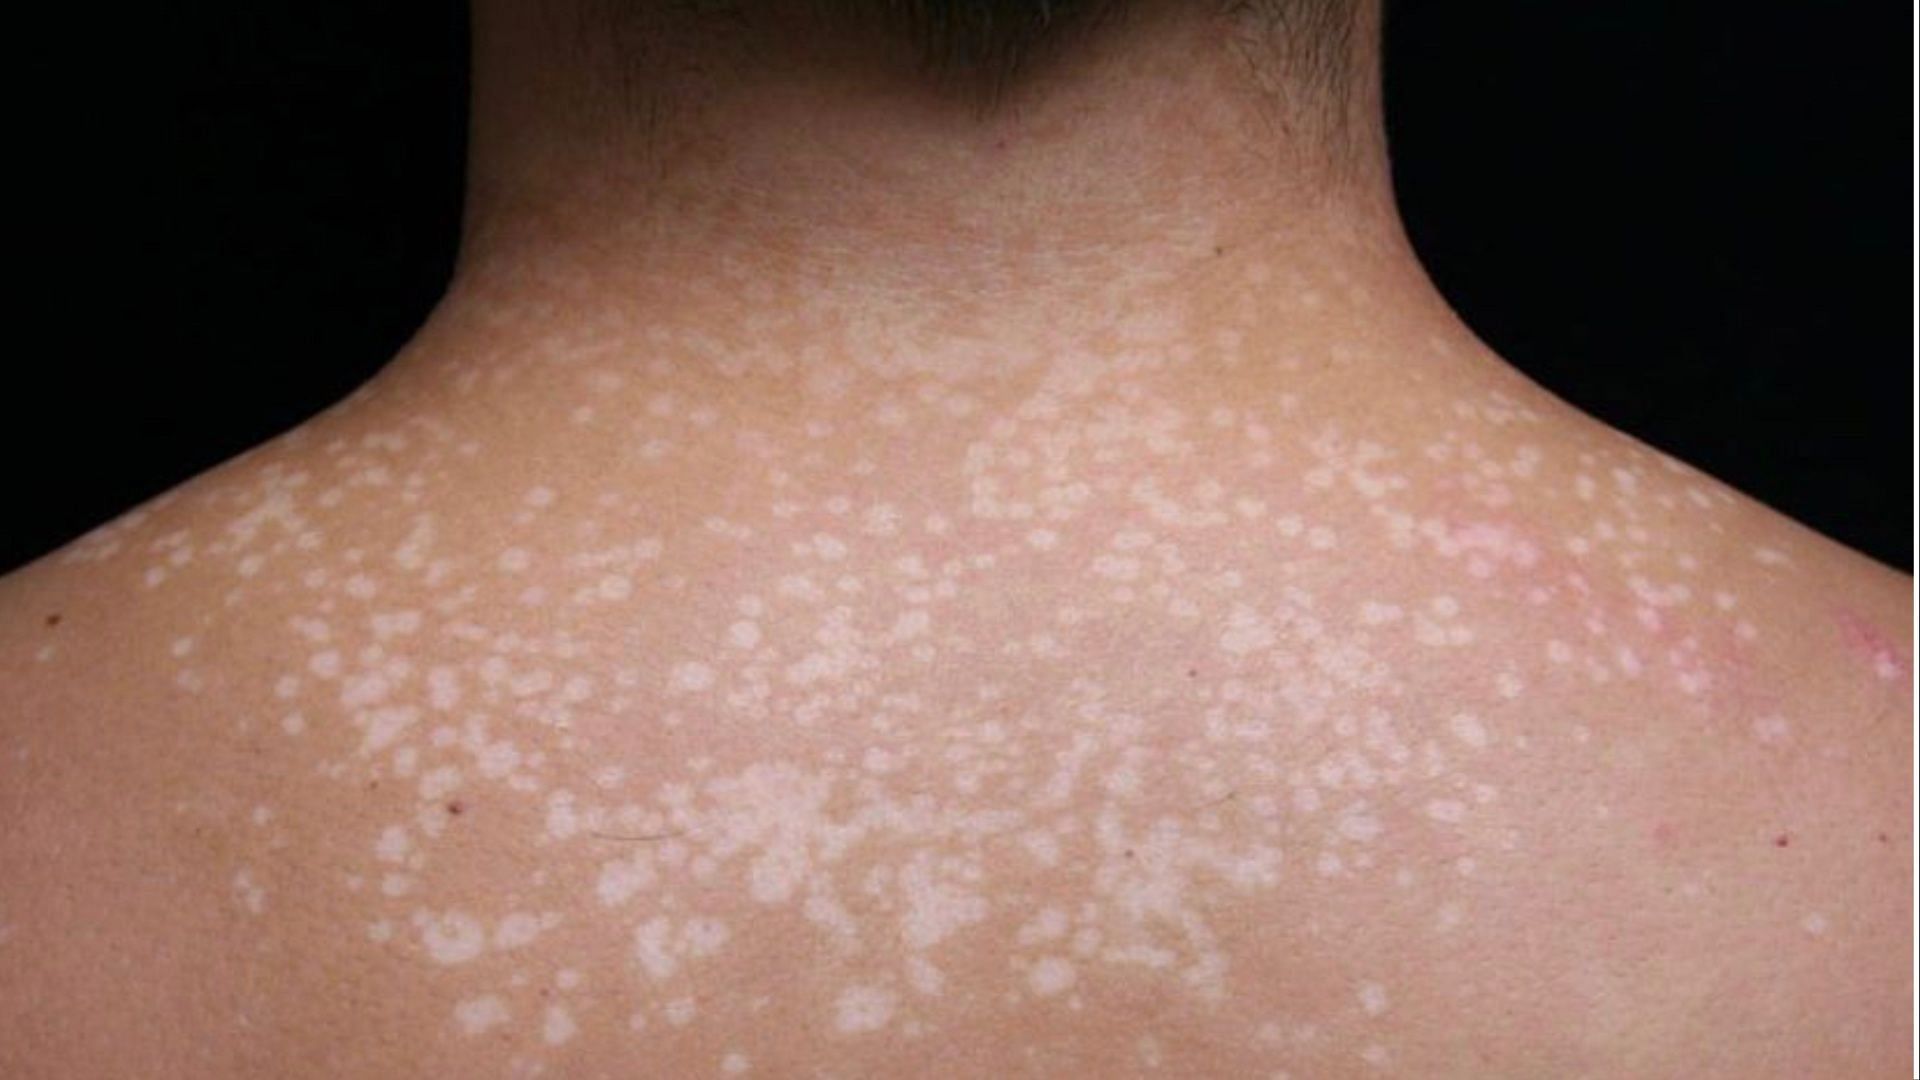 Tinea versicolor is a fungal skin infection. (Photo via Instagram/childrensskincenter)